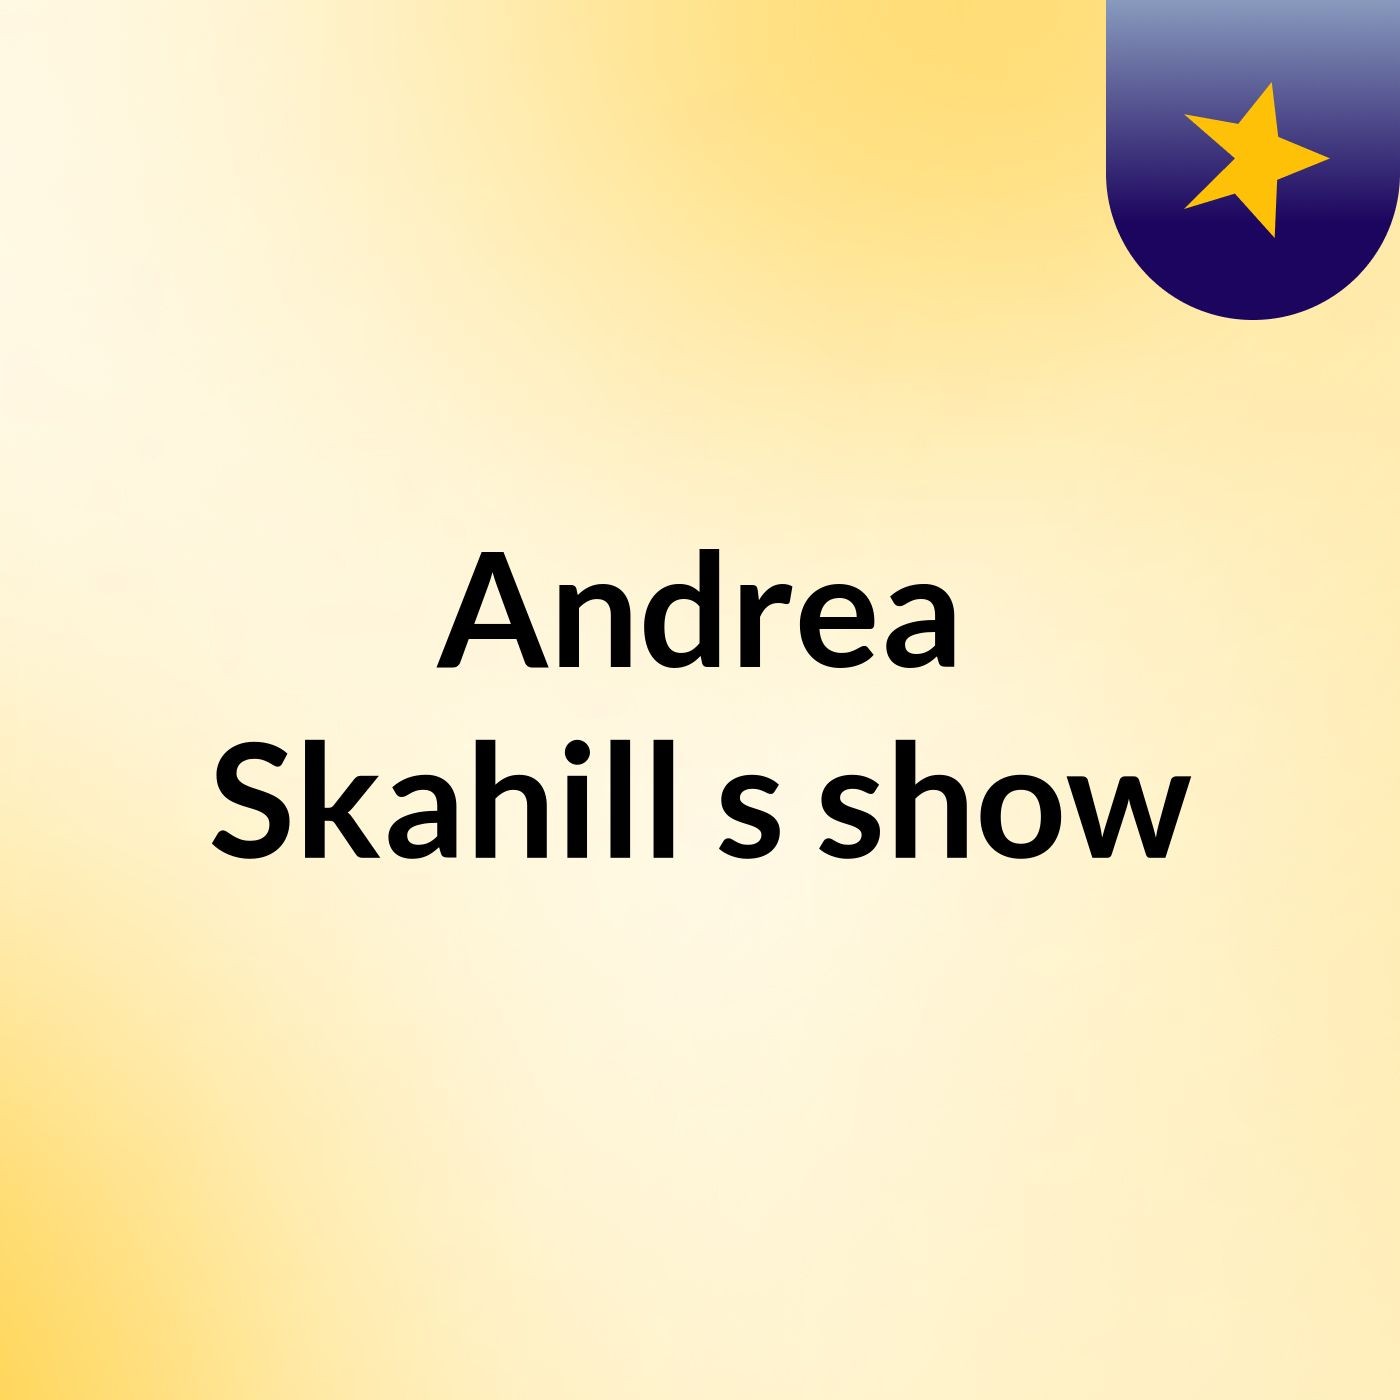 Andrea Skahill's show